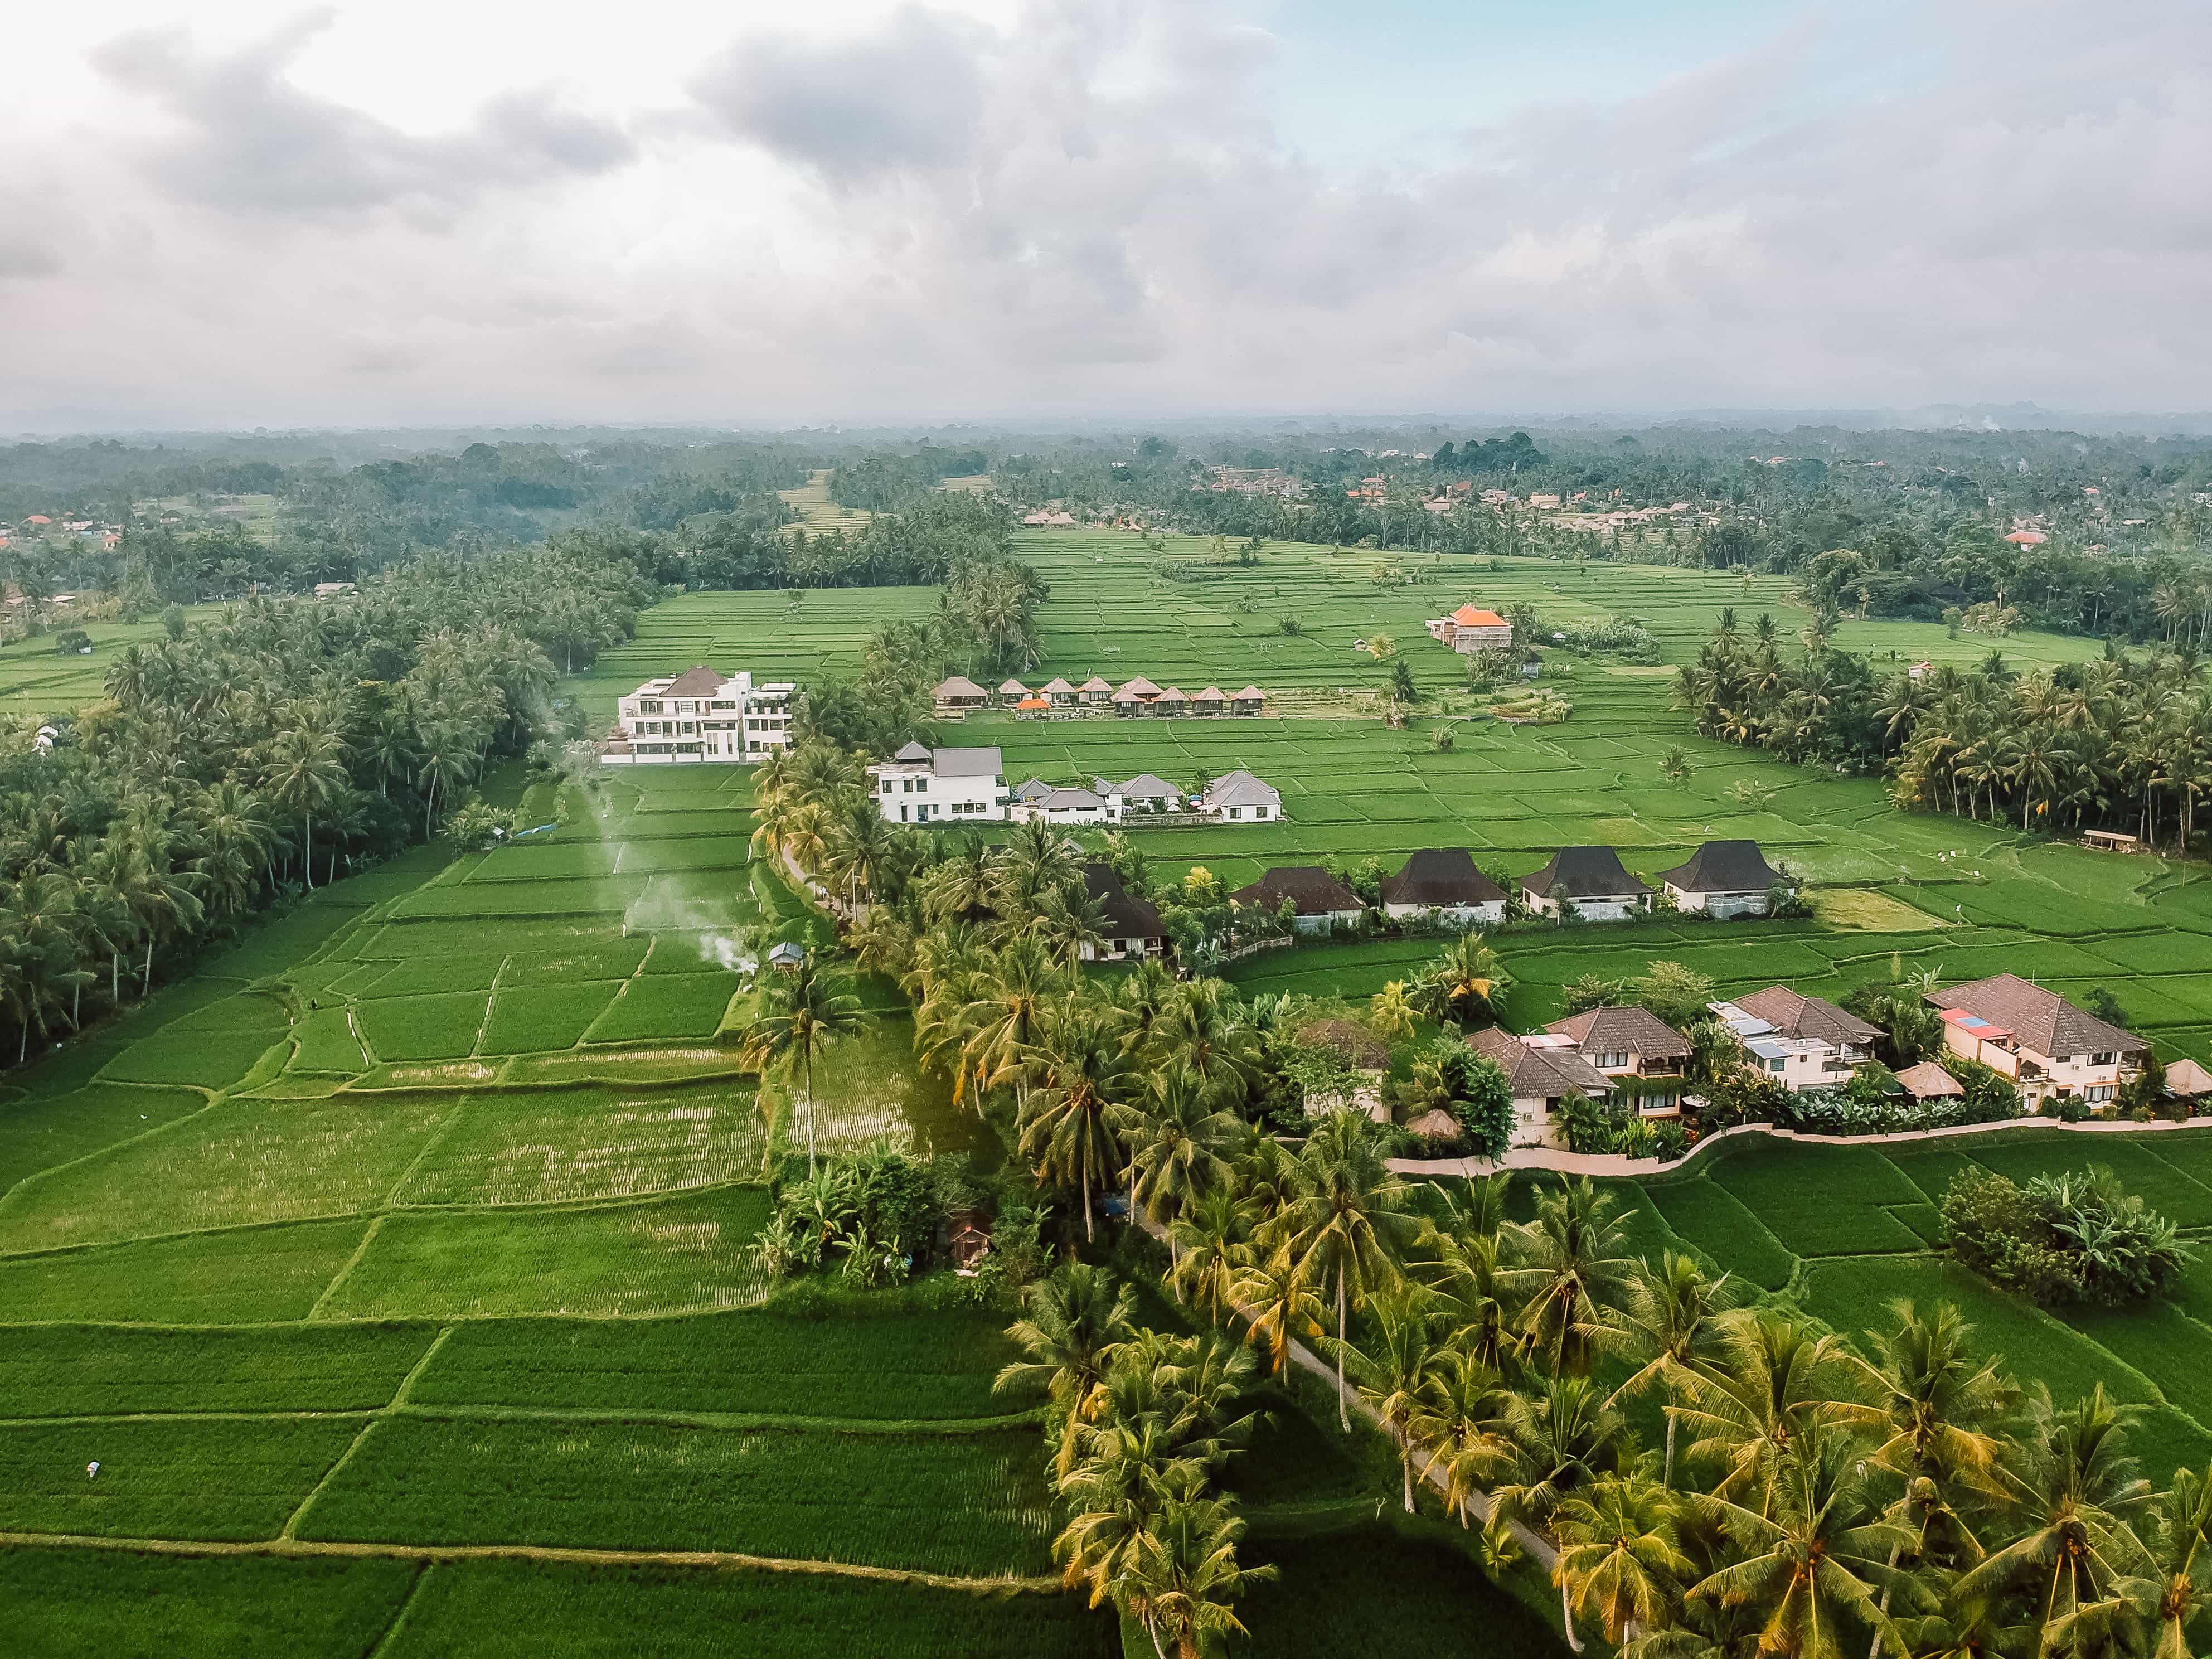 things to do in Ubud, budget to travel in Ubud, visit ricefields in Ubud, where to stay in Ubud, where to sleep in Ubud, how to get to Ubud